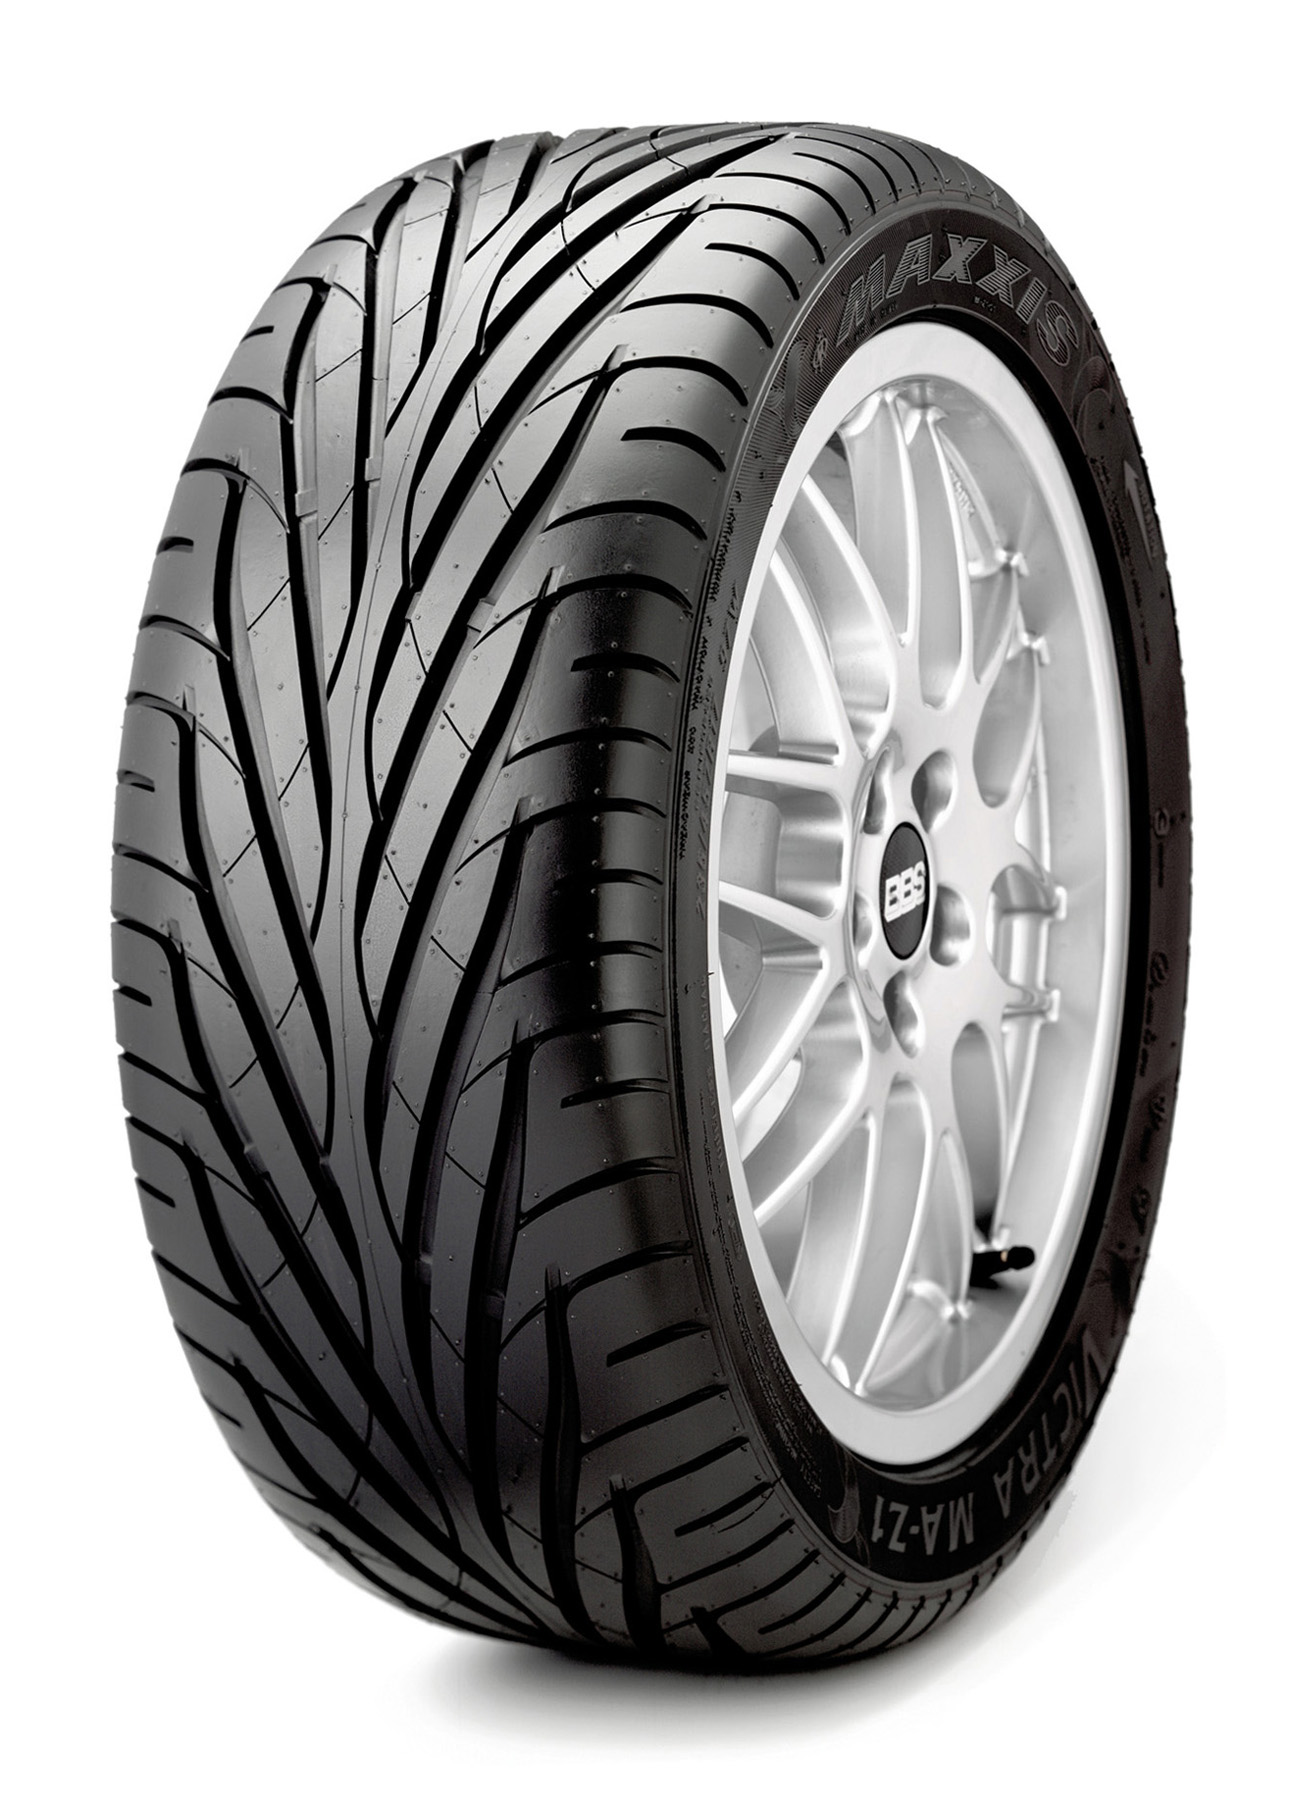 Шины maxxis victra sport 5 отзывы. Maxxis ma-z1 Victra. 195/50r15, Maxxis ma-z1 Victra 86v. Maxxis ma-z1 94w. Maxxis 195/50r15 ma-z4 Victra.